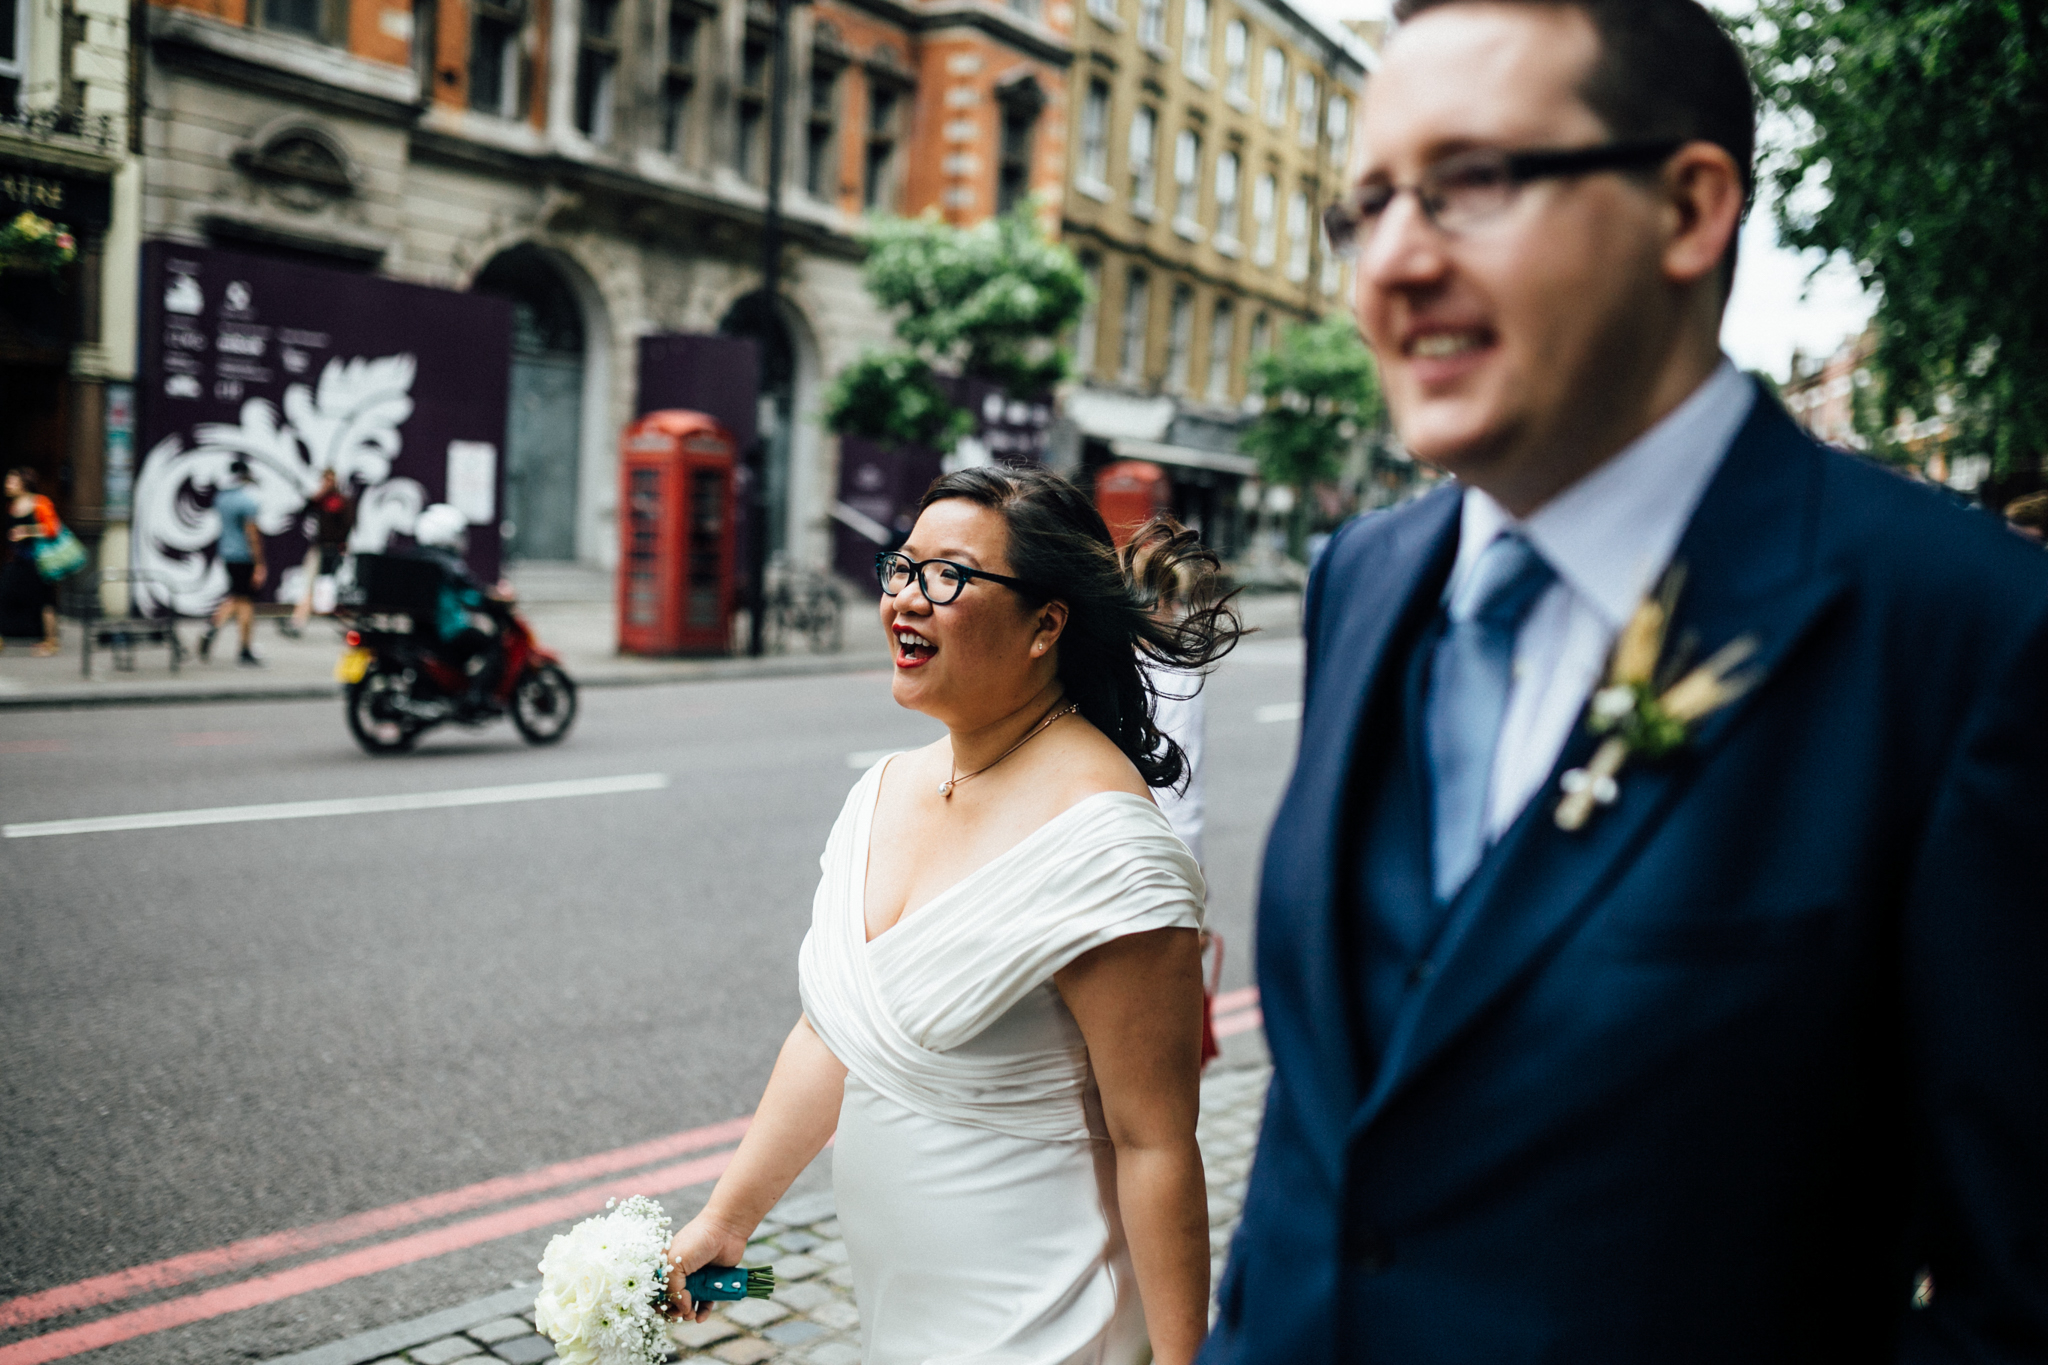 wedding in islington and narrowboat pub and angel area in london wedding photographer